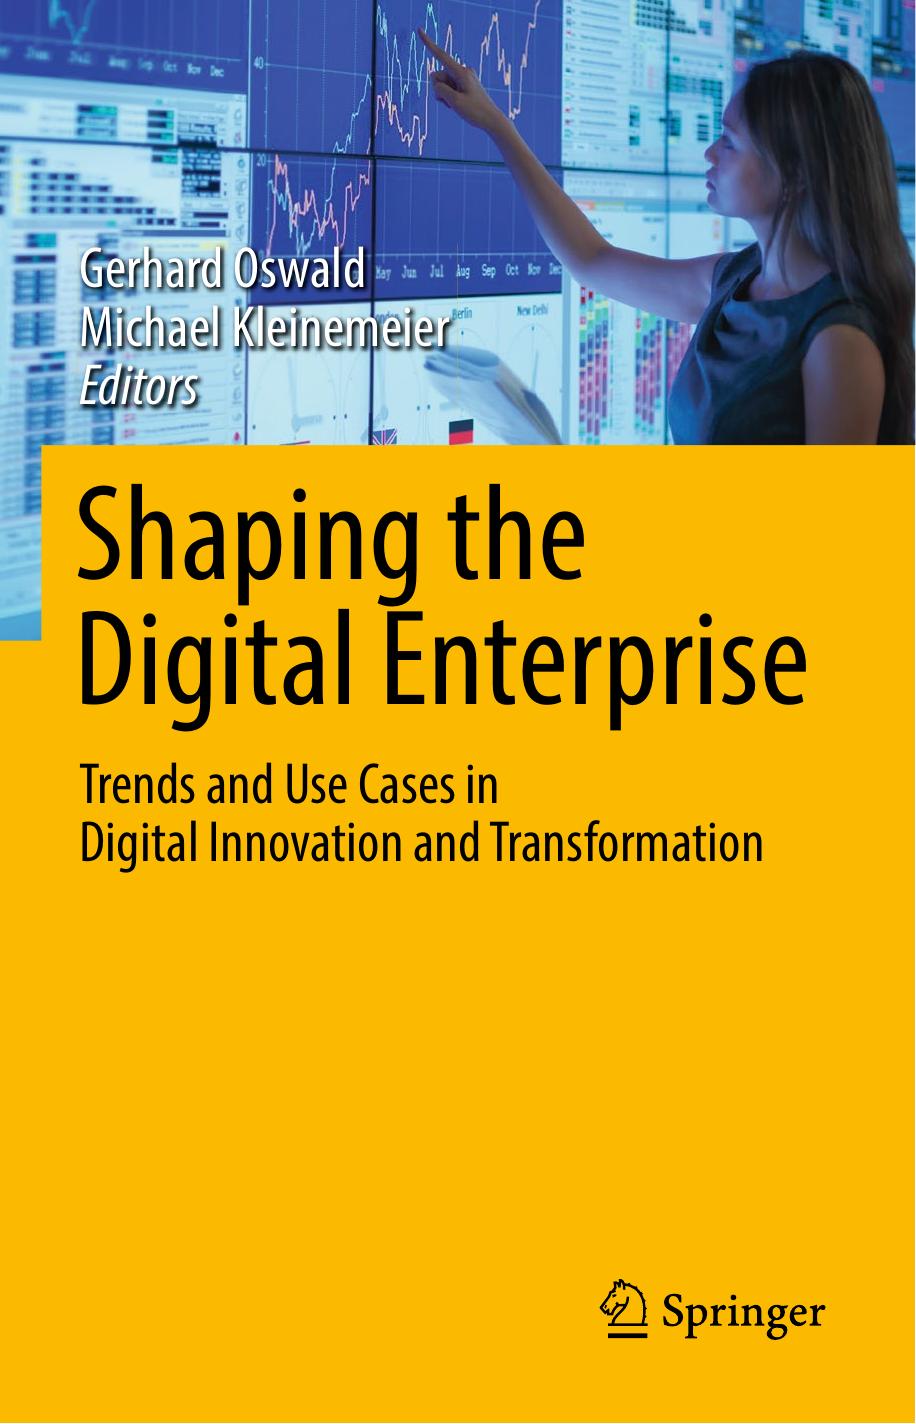 Shaping the Digital Enterprise Trends and Use Cases in Digital Innovation and Transformation (Gerhard Oswald, Michael Kleinemeier (eds.)) (z-lib.org)